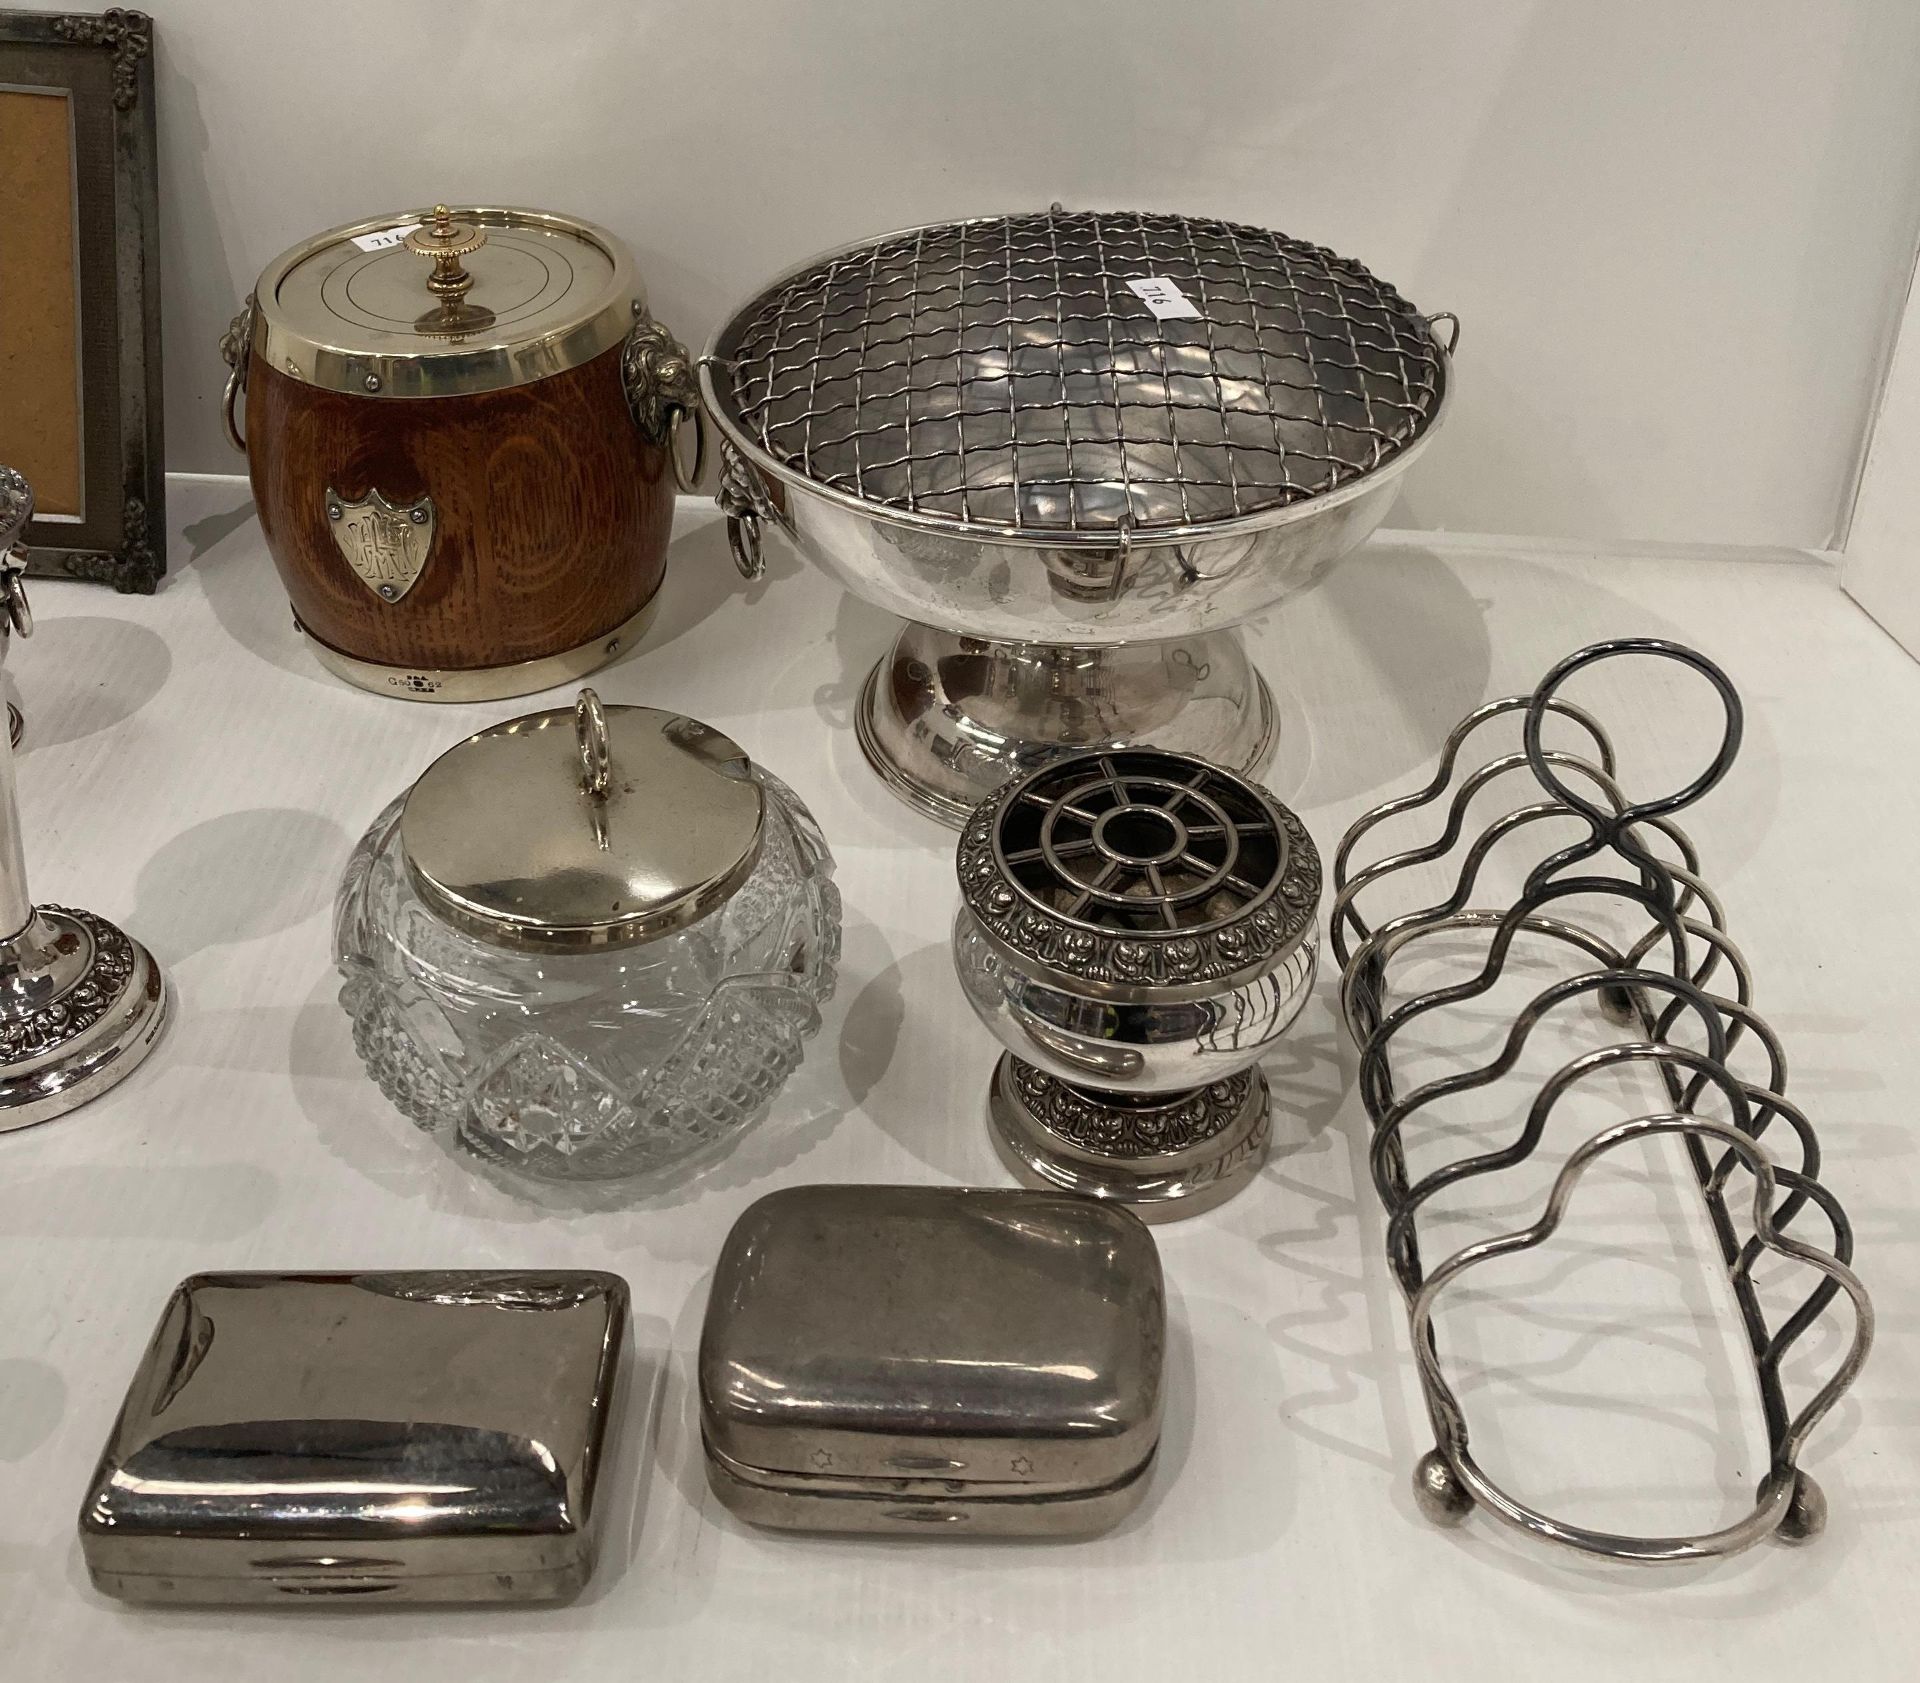 Contents to tray - assorted EPNS items including ice bucket, toast rack, vases, - Image 4 of 4